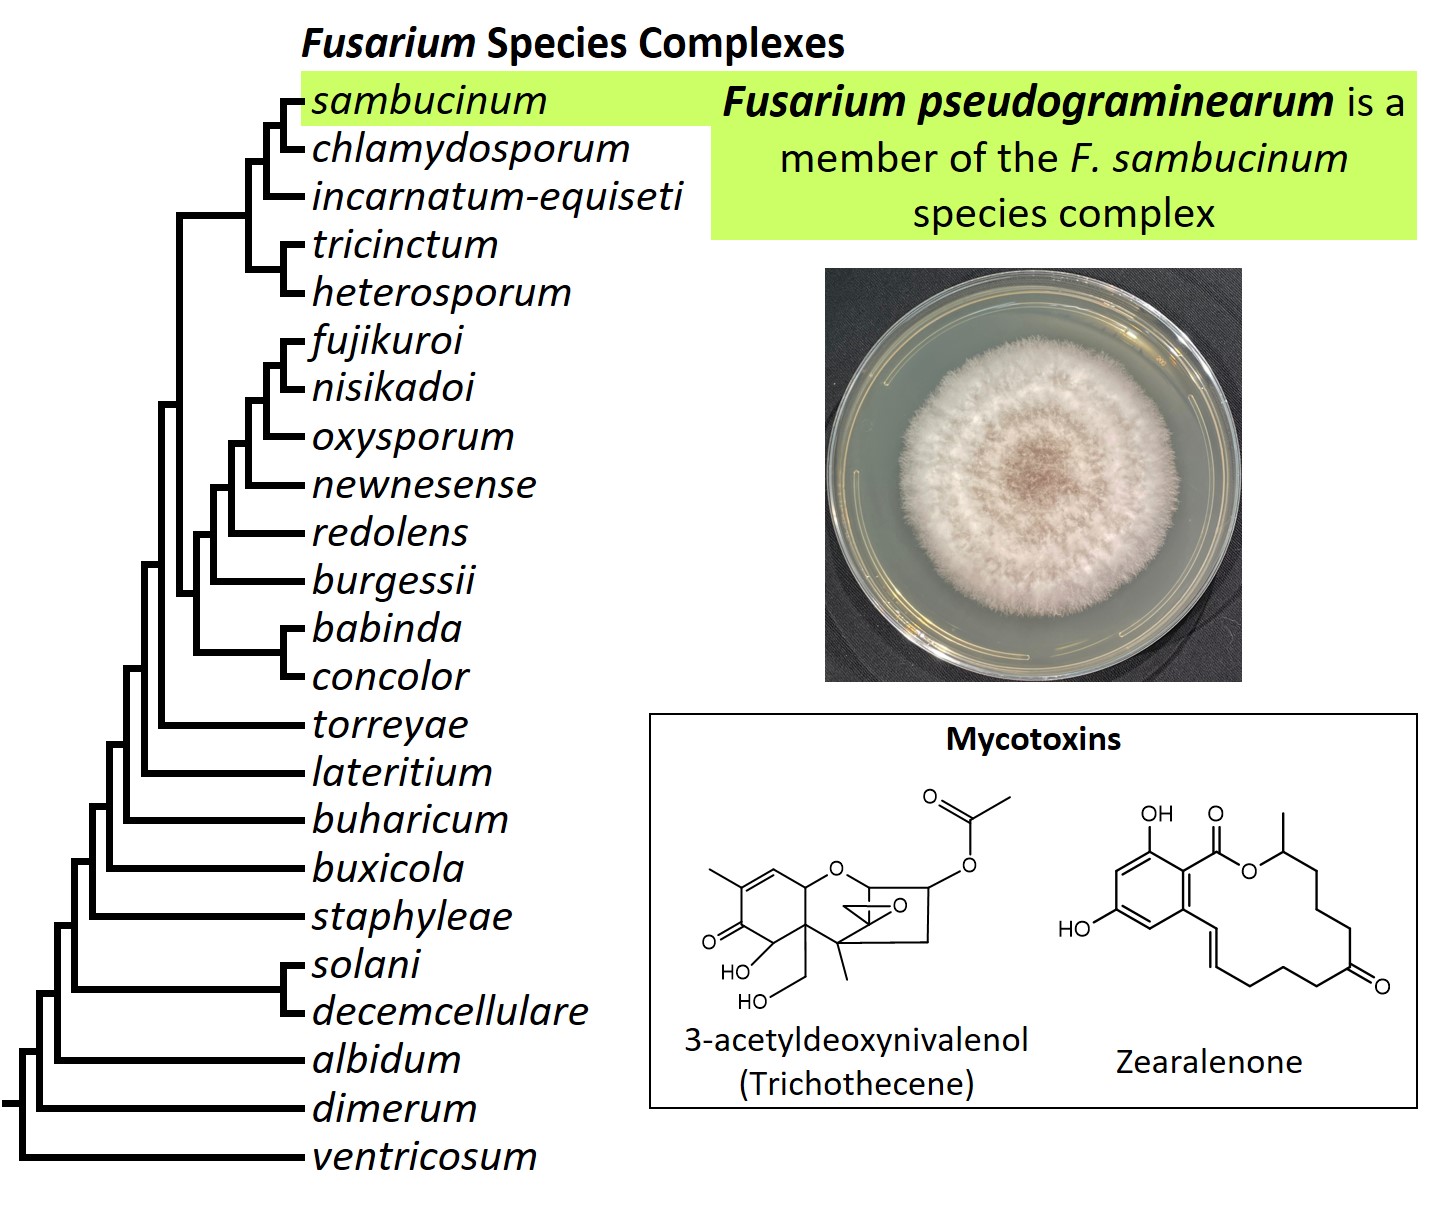 Left &ndash; tree showing phylogenetic relationships of the 23
Fusarium species complexes and placement of F. pseudograminearum
within the F. solani species complex. In the tree, species complex
names are abbreviated using specific epithets of the species after
which the complexes are named (e.g., the F. sambucinum species
complex is abbreviated as sambucinum). Middle right &ndash; culture
of F. pseudograminearum NRRL 62612 (= CS3096) growing on potato
dextrose agar medium. Bottom right &ndash; chemical structures of
3-acetyldeoxynivalenol and zearalenone, two mycotoxins produced by
F. pseudograminearum. Image credit: Robert H. Proctor, Amy McGovern
and Crystal Probyn.